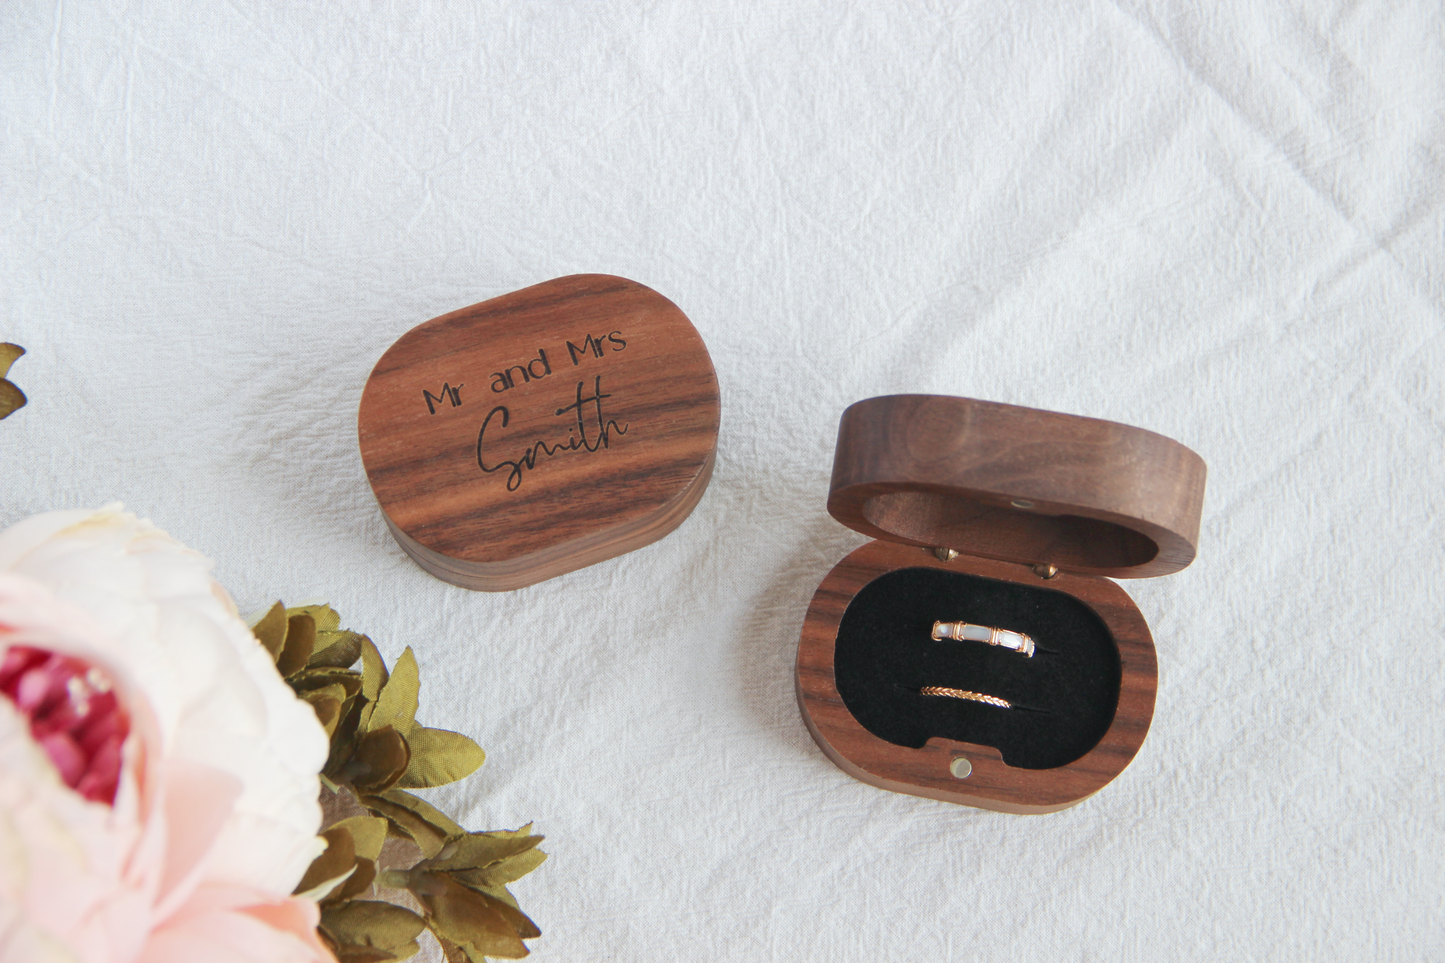 Charming Walnut Wedding Ring Box - Compact Luxury for Your Cherished Moment